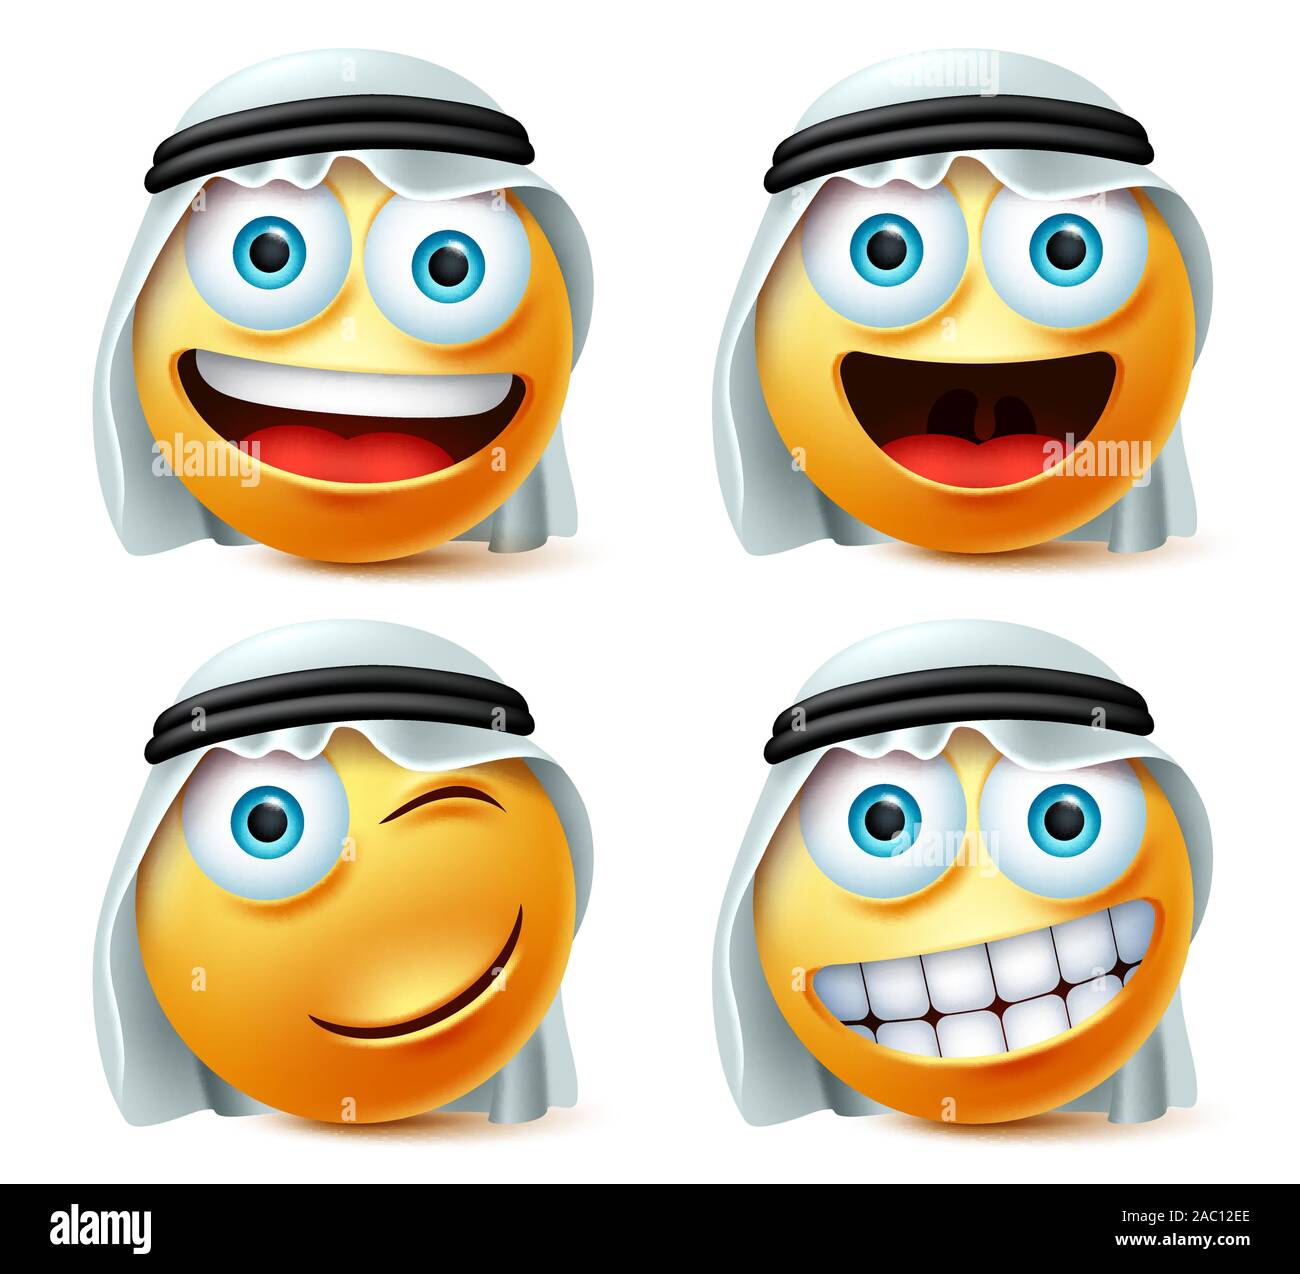 Happy arab emoji and emoticon vector set. Saudi arabian cute emojis face with happy, naughty and smiling facial expression wearing white thobe. Stock Vector